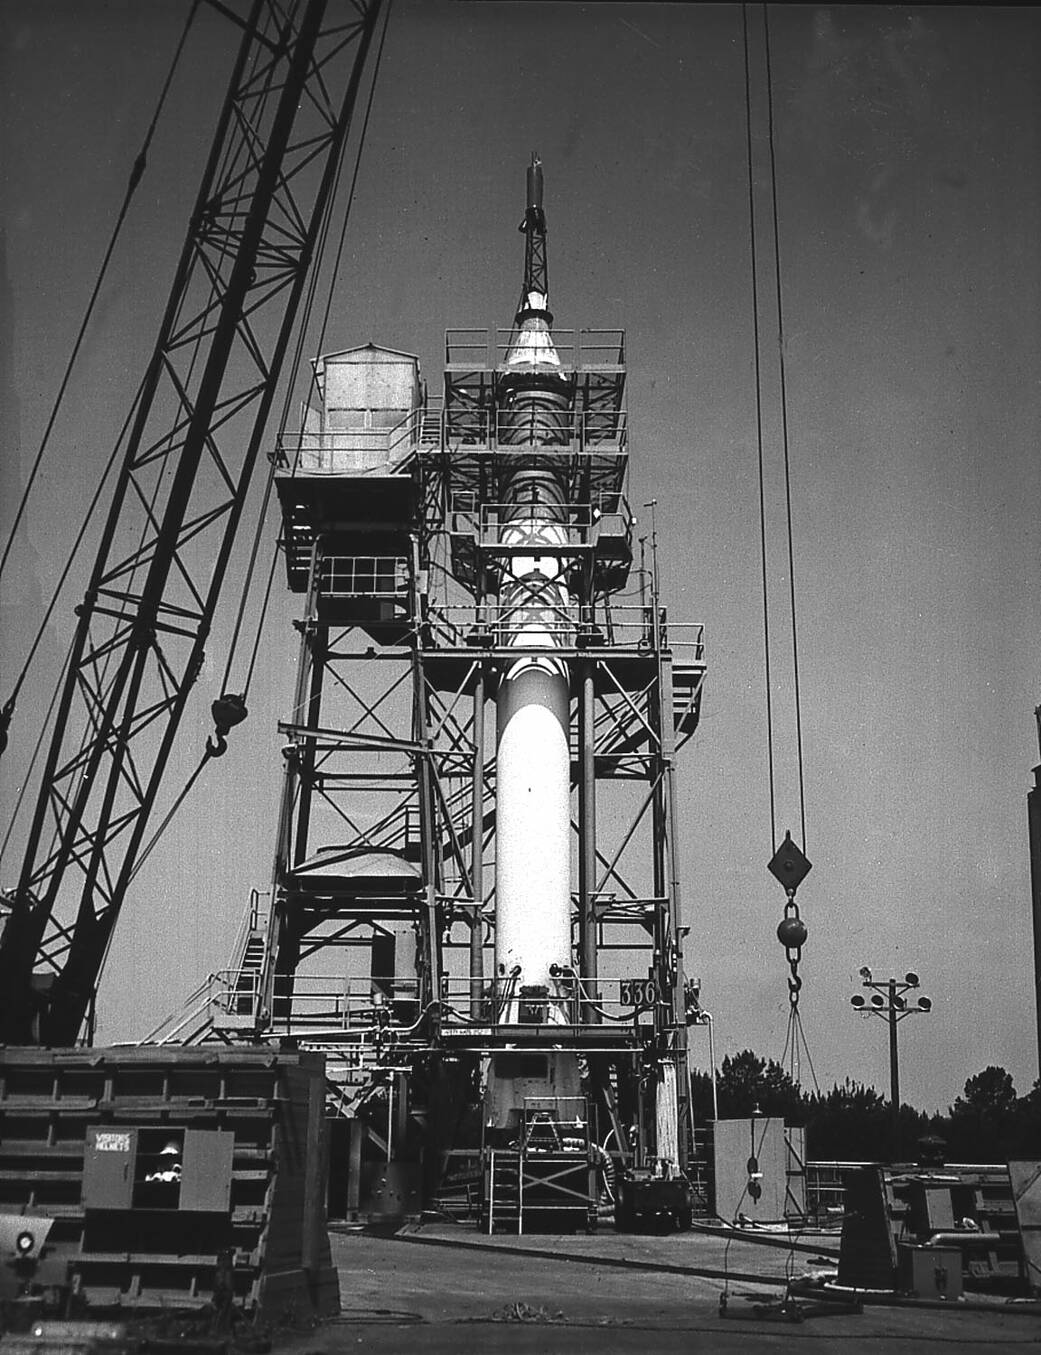 A Mercury-Redstone launch vehicle awaits test-firing in the Redstone Test Stand during the late 1950s.